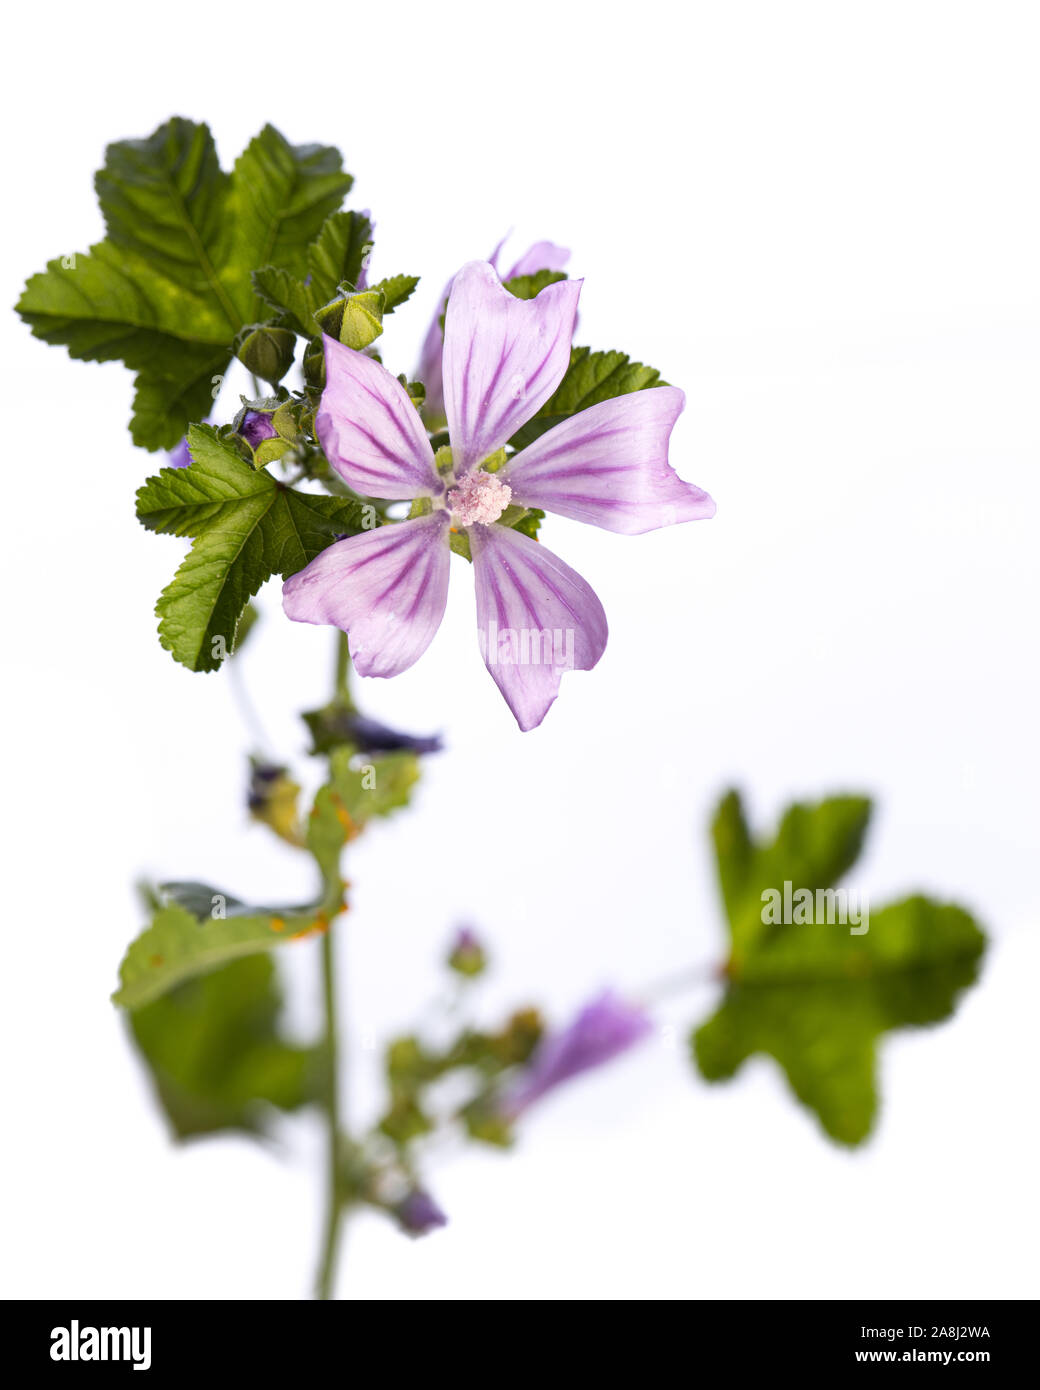 medicinal plant from my garden: Malva sylvestris ( common mallow ) stem, flowers and leafs isolated on white background Stock Photo